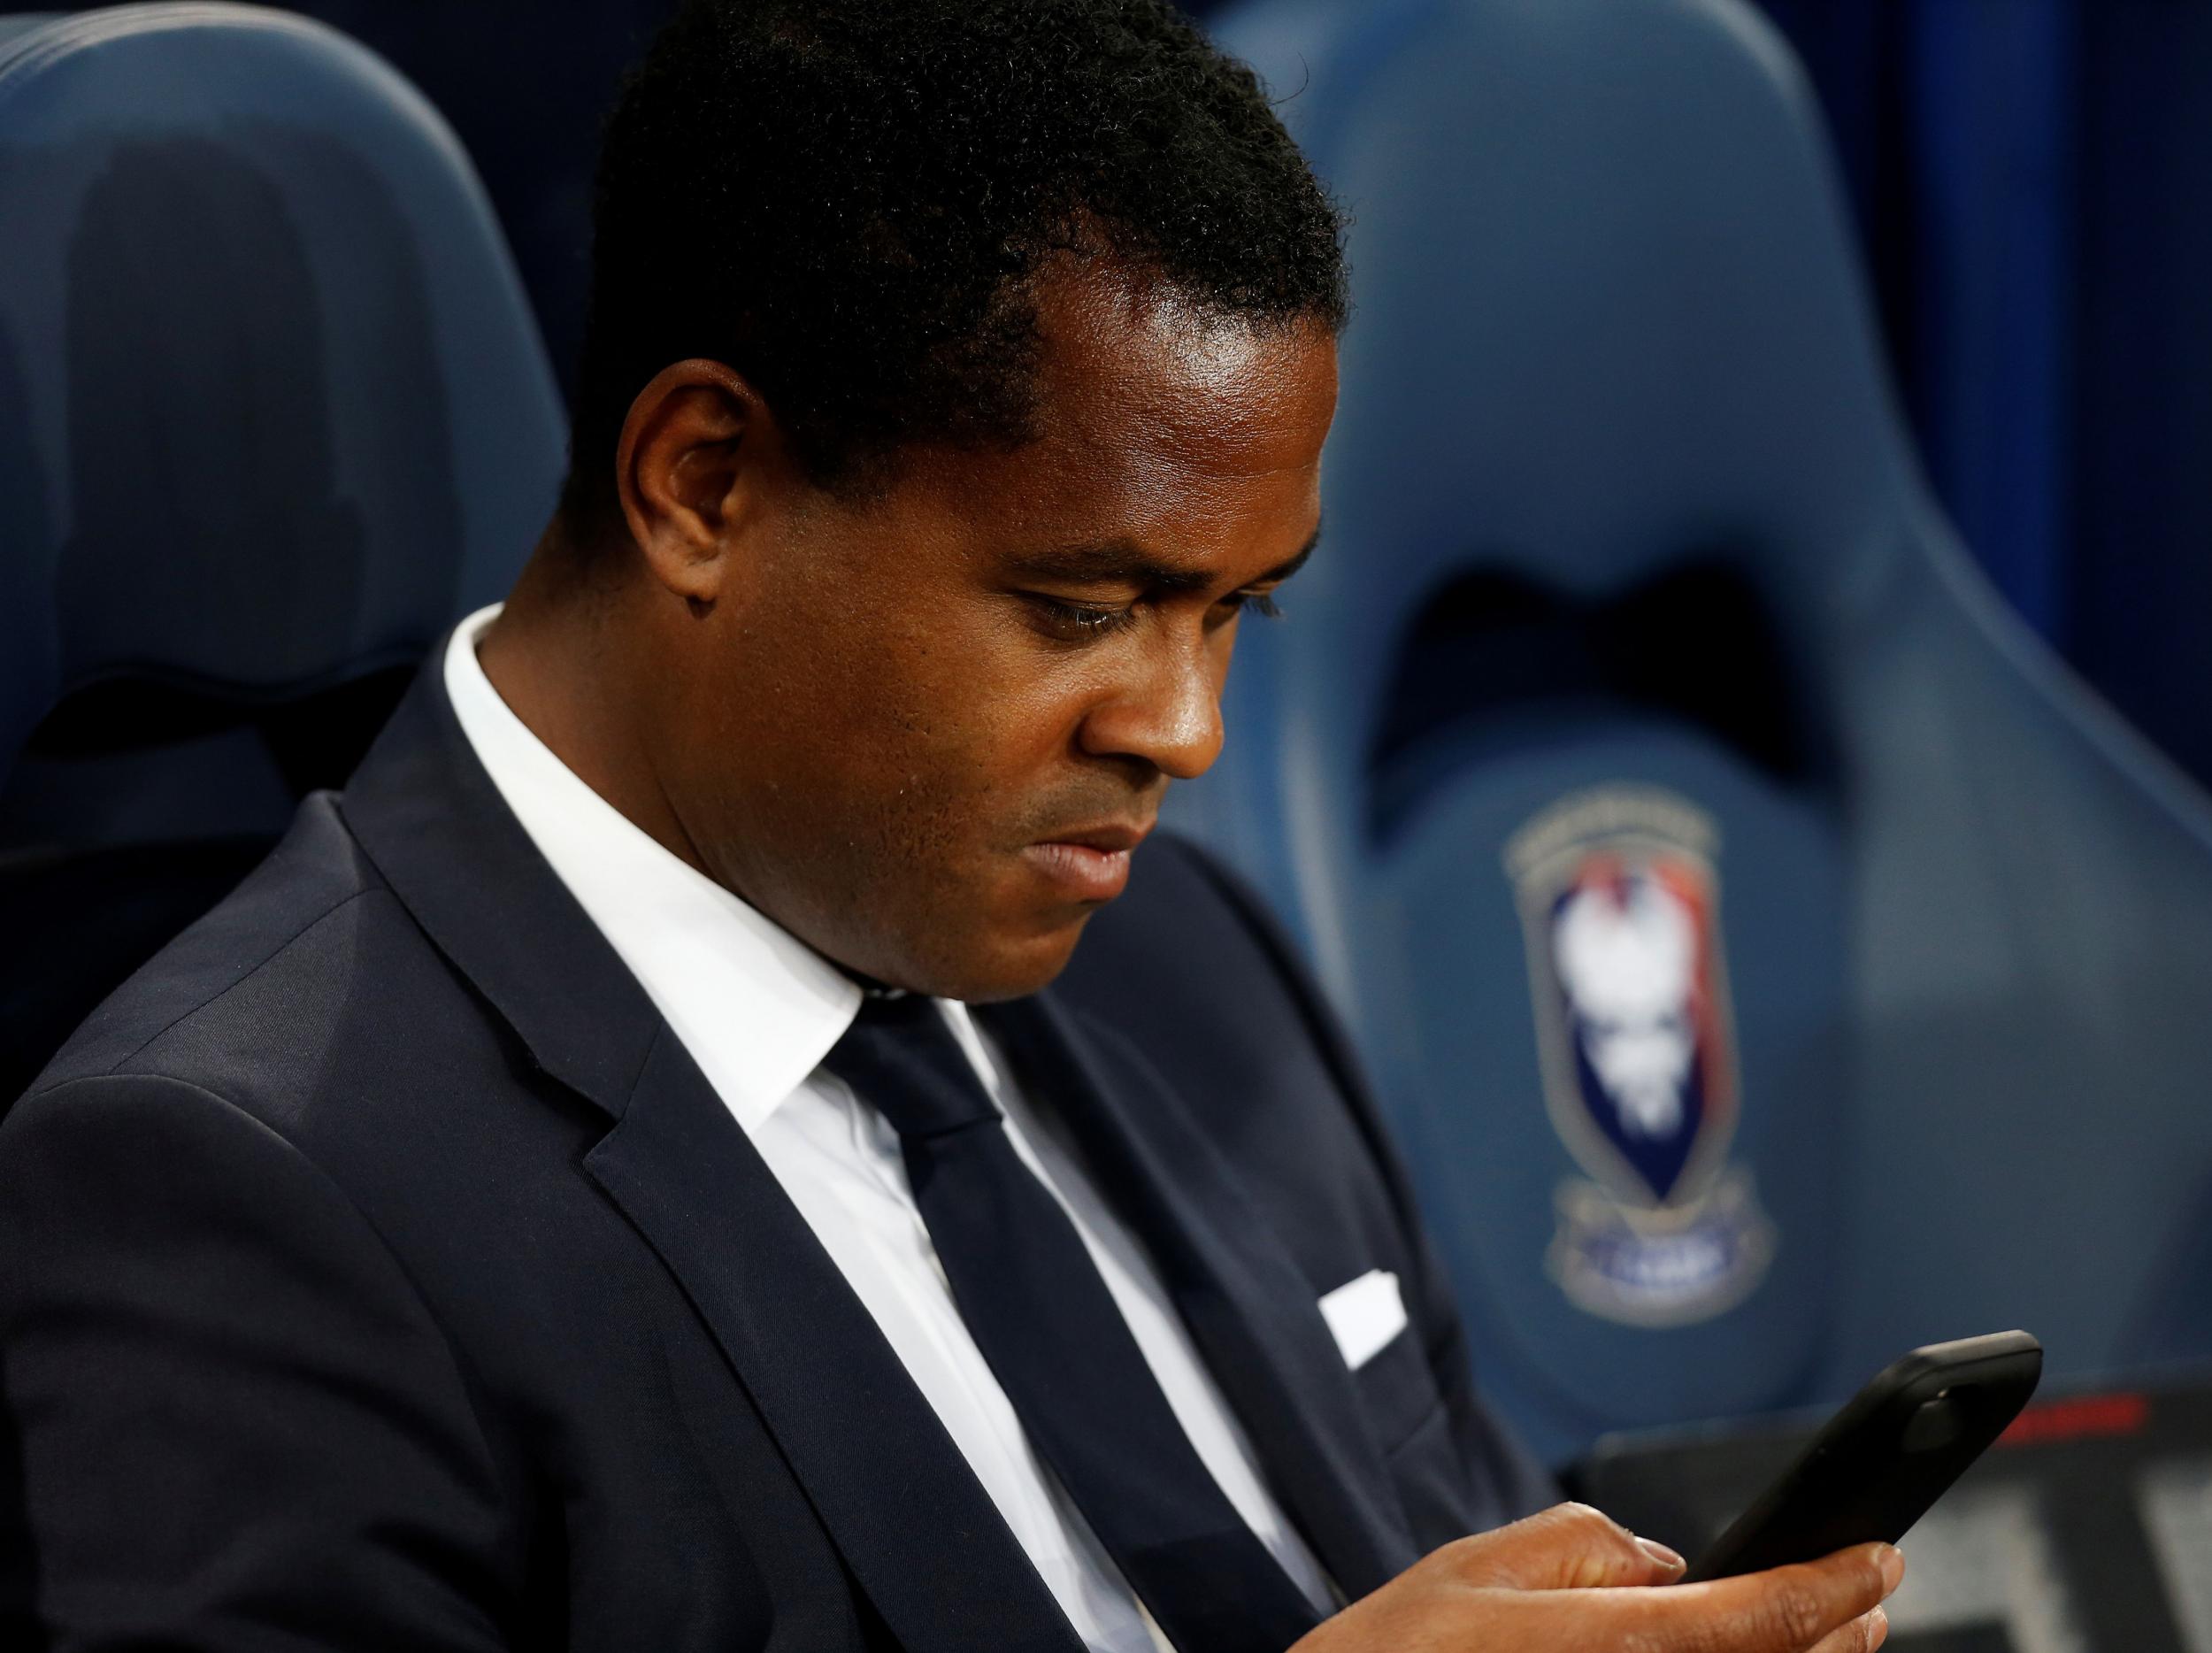 Kluivert has struggled in his executive role